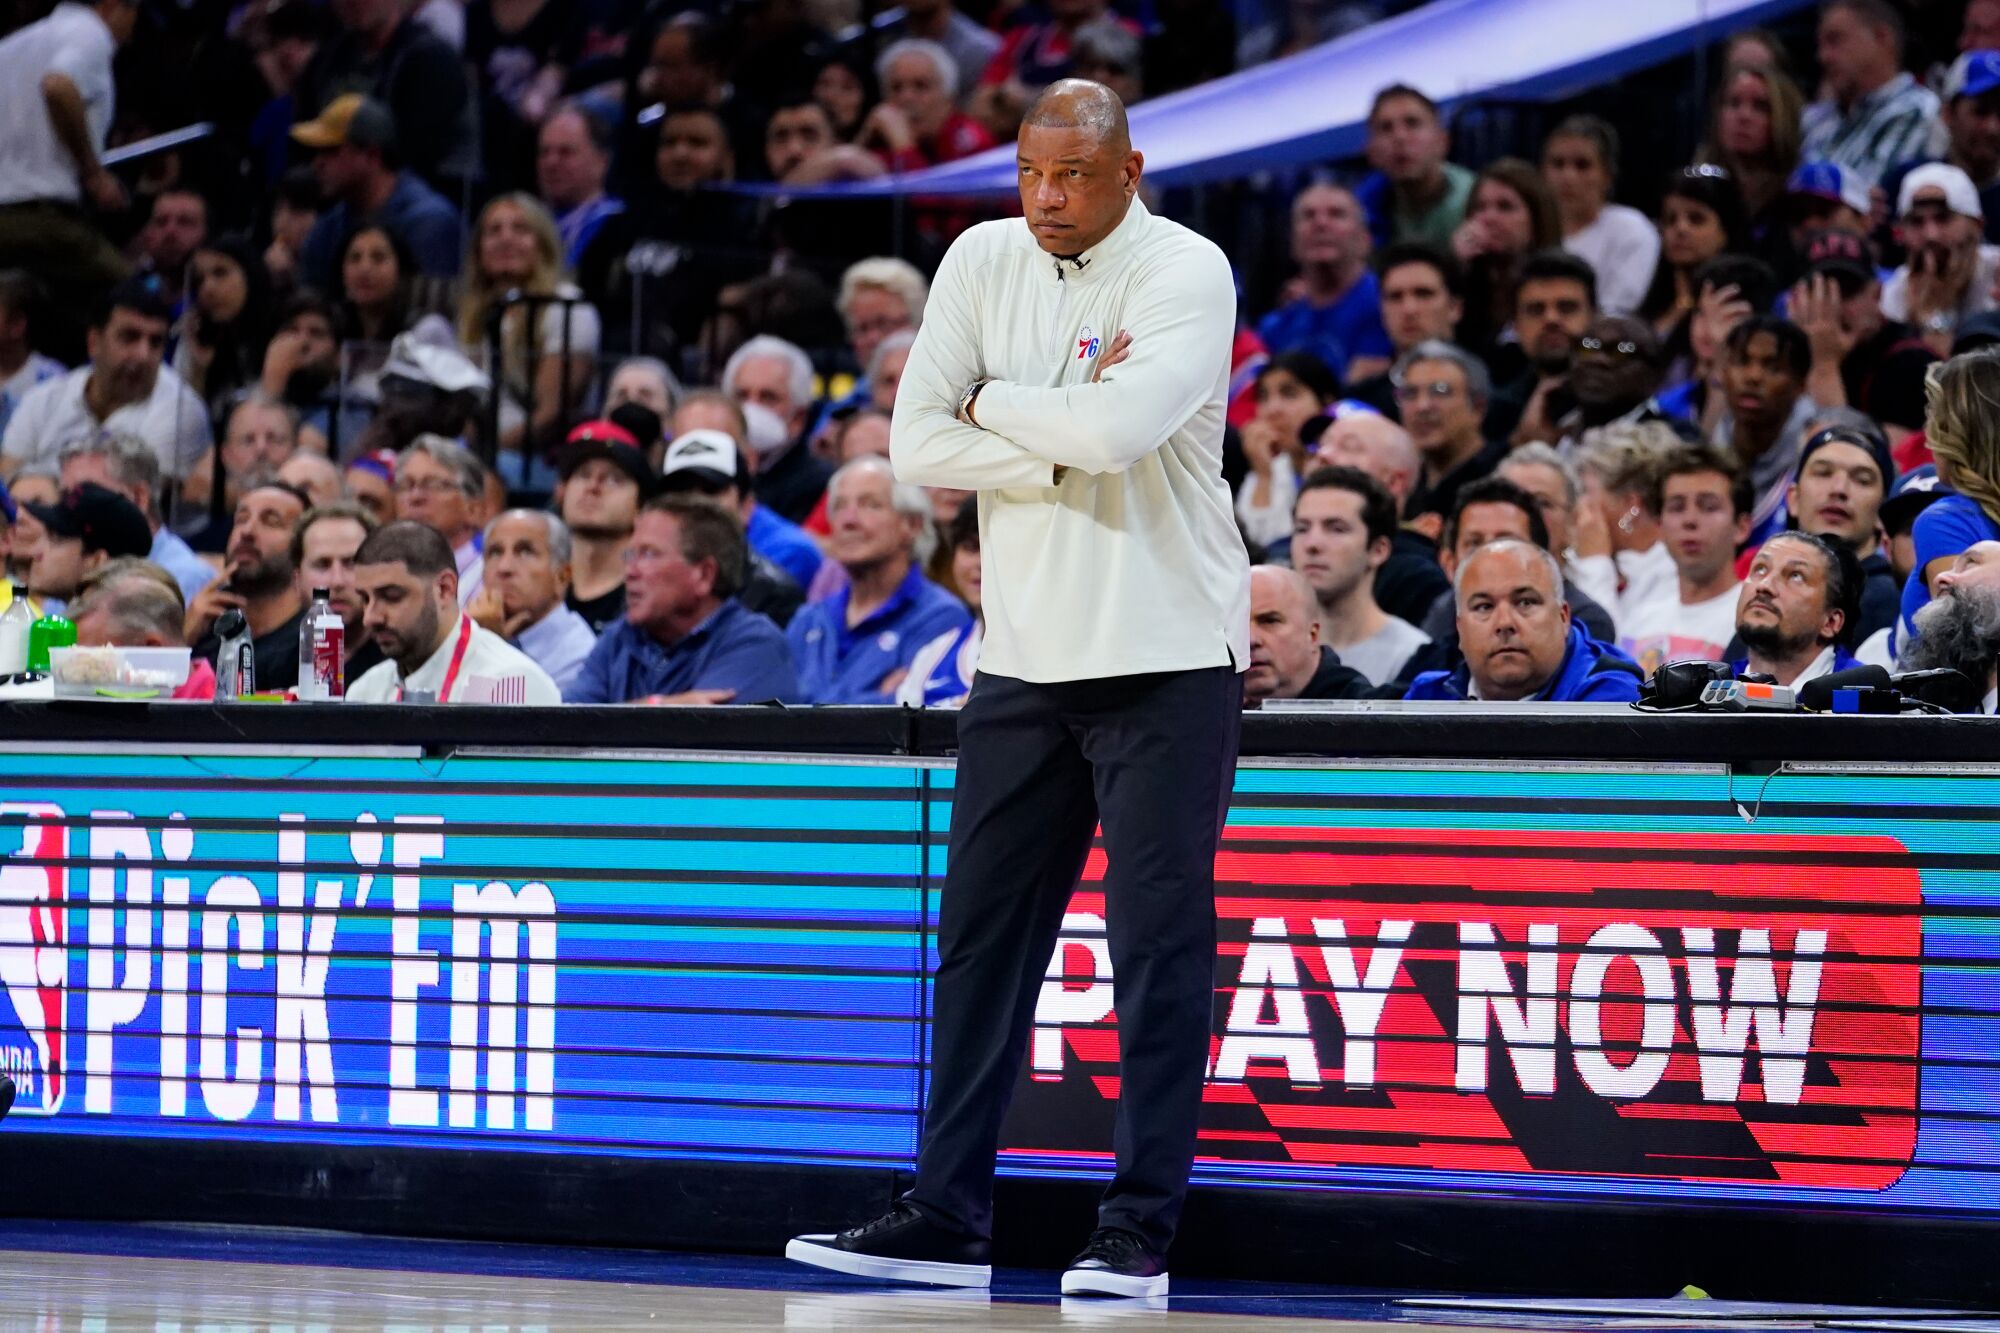 Philadelphia 76ers coach Doc Rivers has his arms folded as he watches Game 6 standing along the sideline.